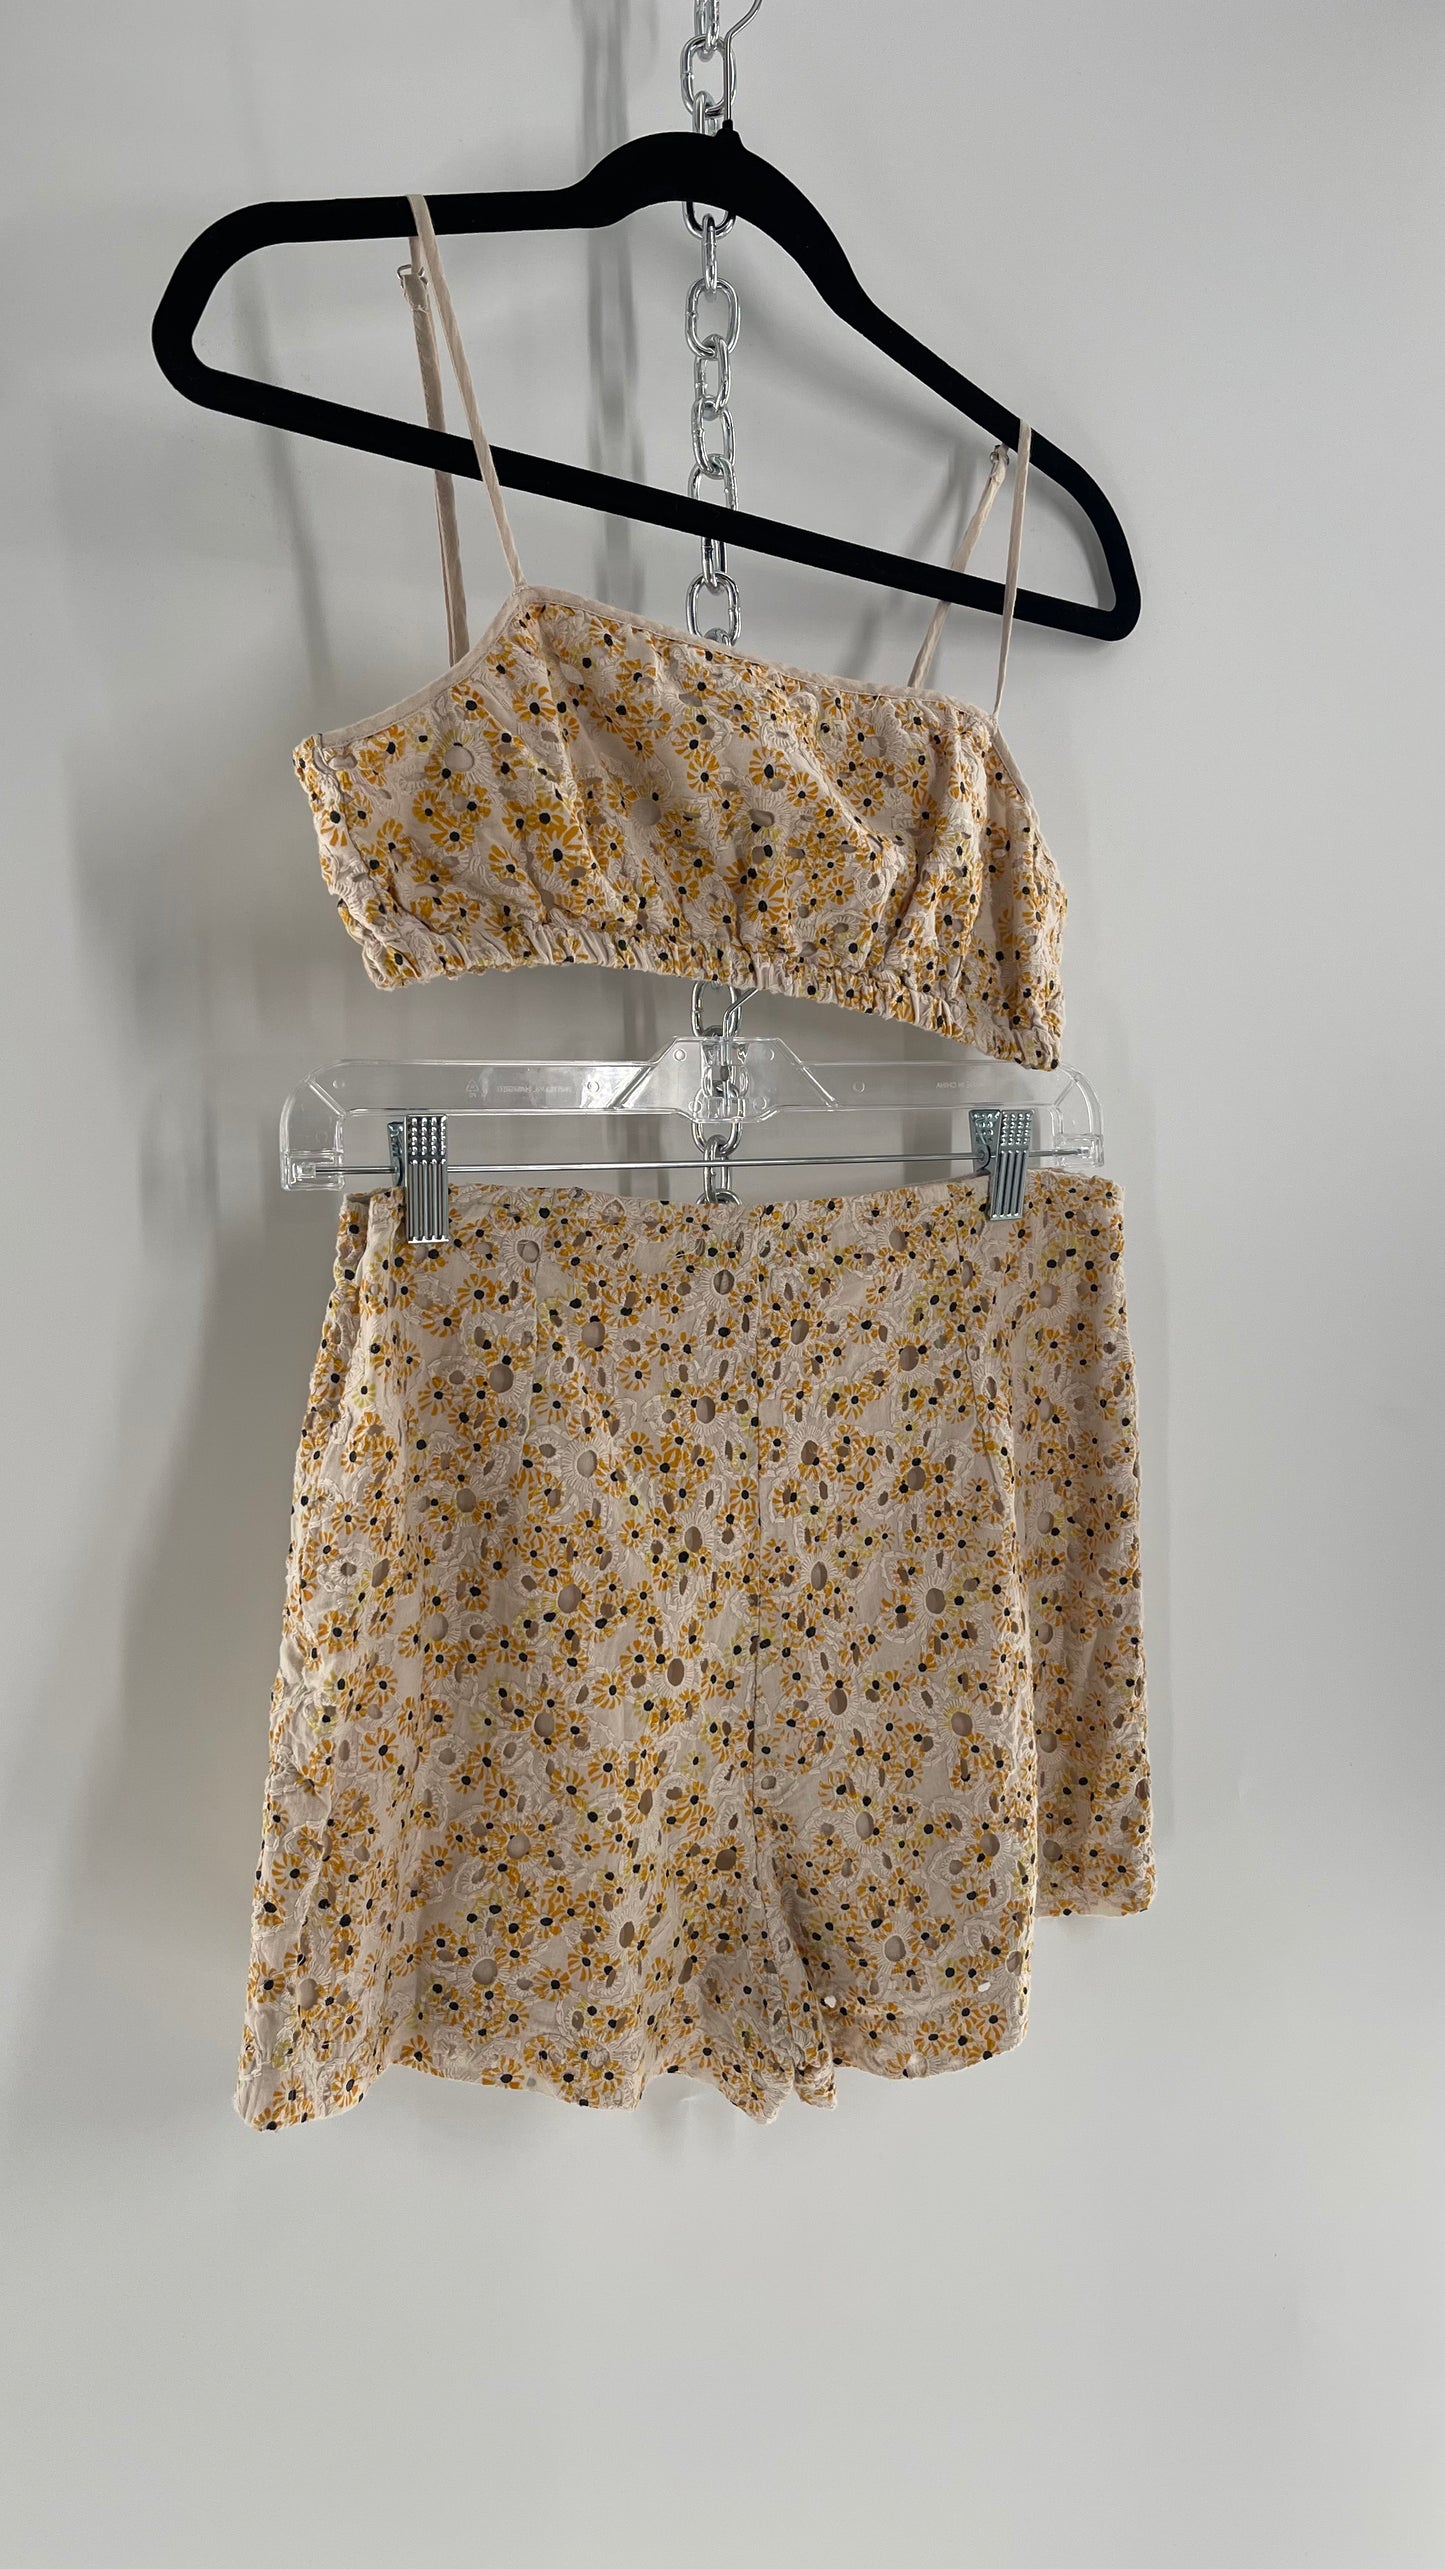 Urban Outfitters Eyelet Lace Daisy Print 2pc Shorts and Bustier Tank Set (Small Top Medium Bottoms)